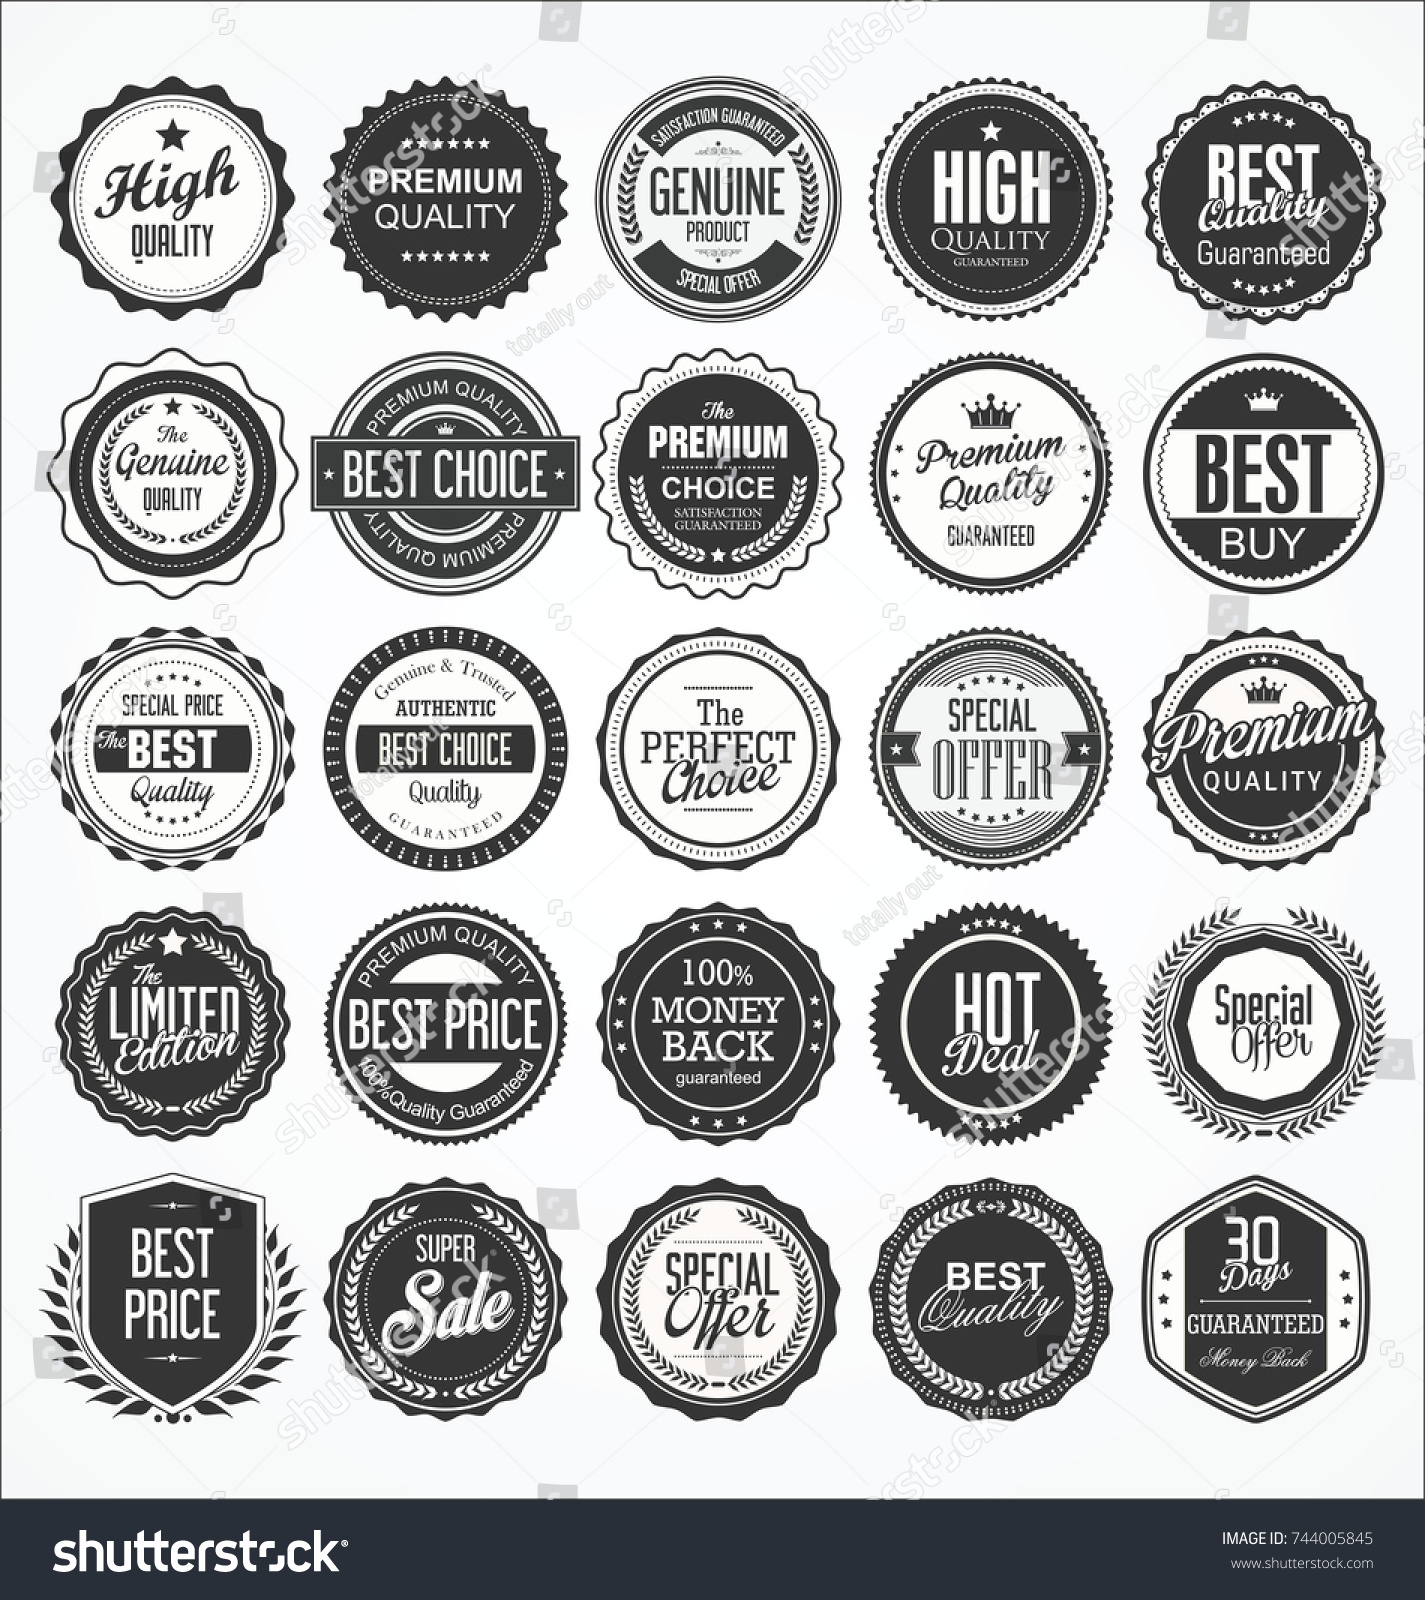 Retro vintage badge and label collection #744005845